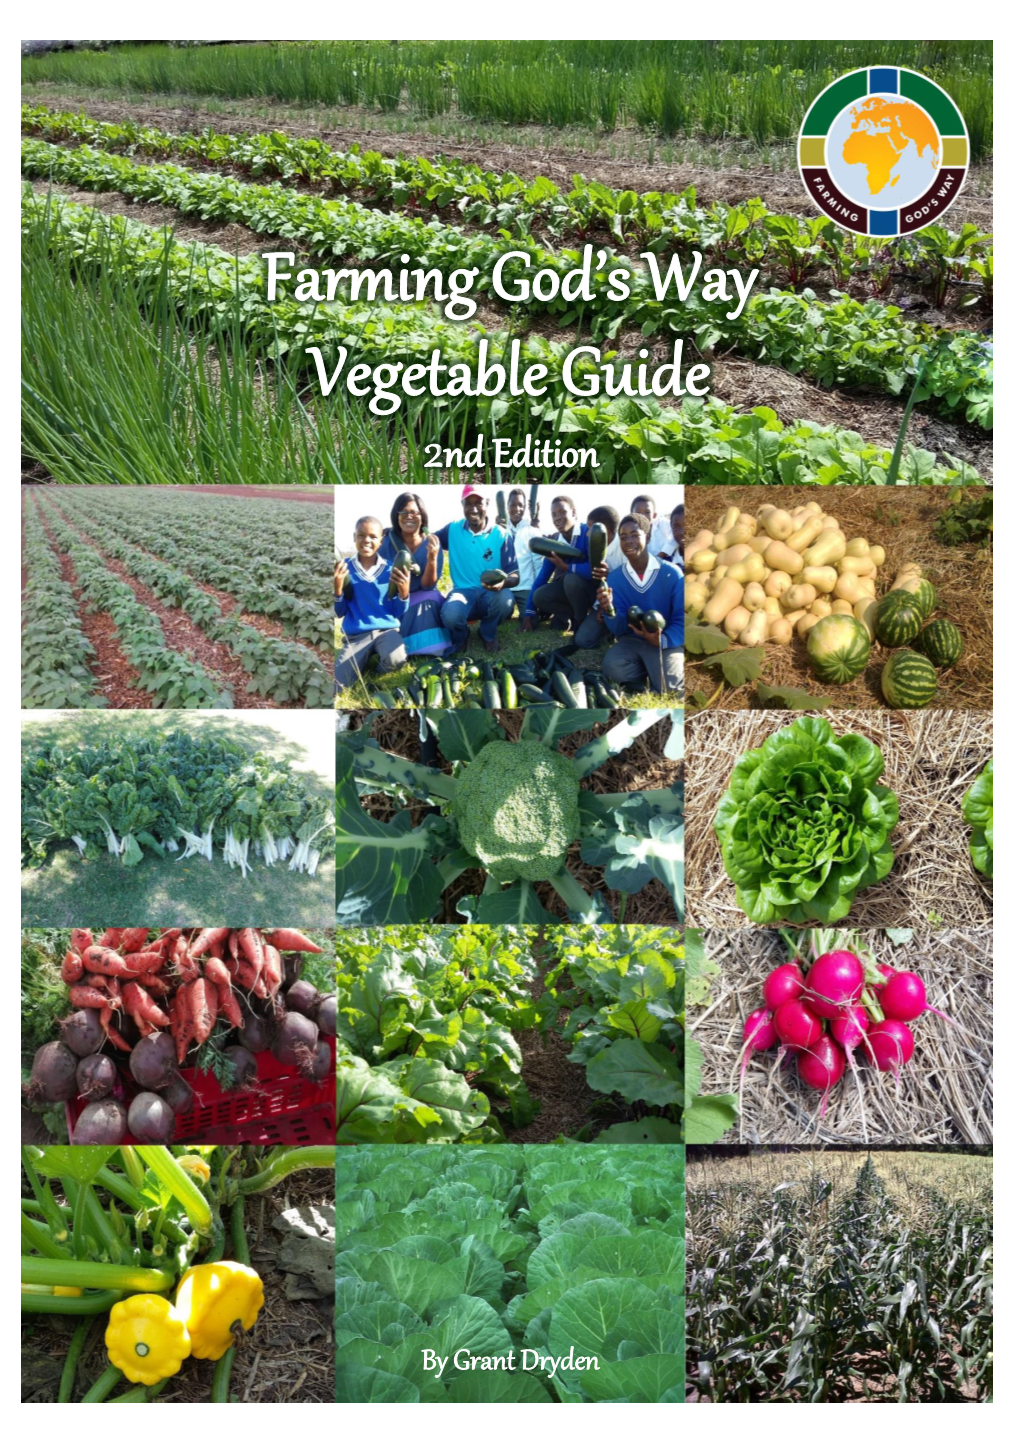 Farming God's Way Vegetable Guide